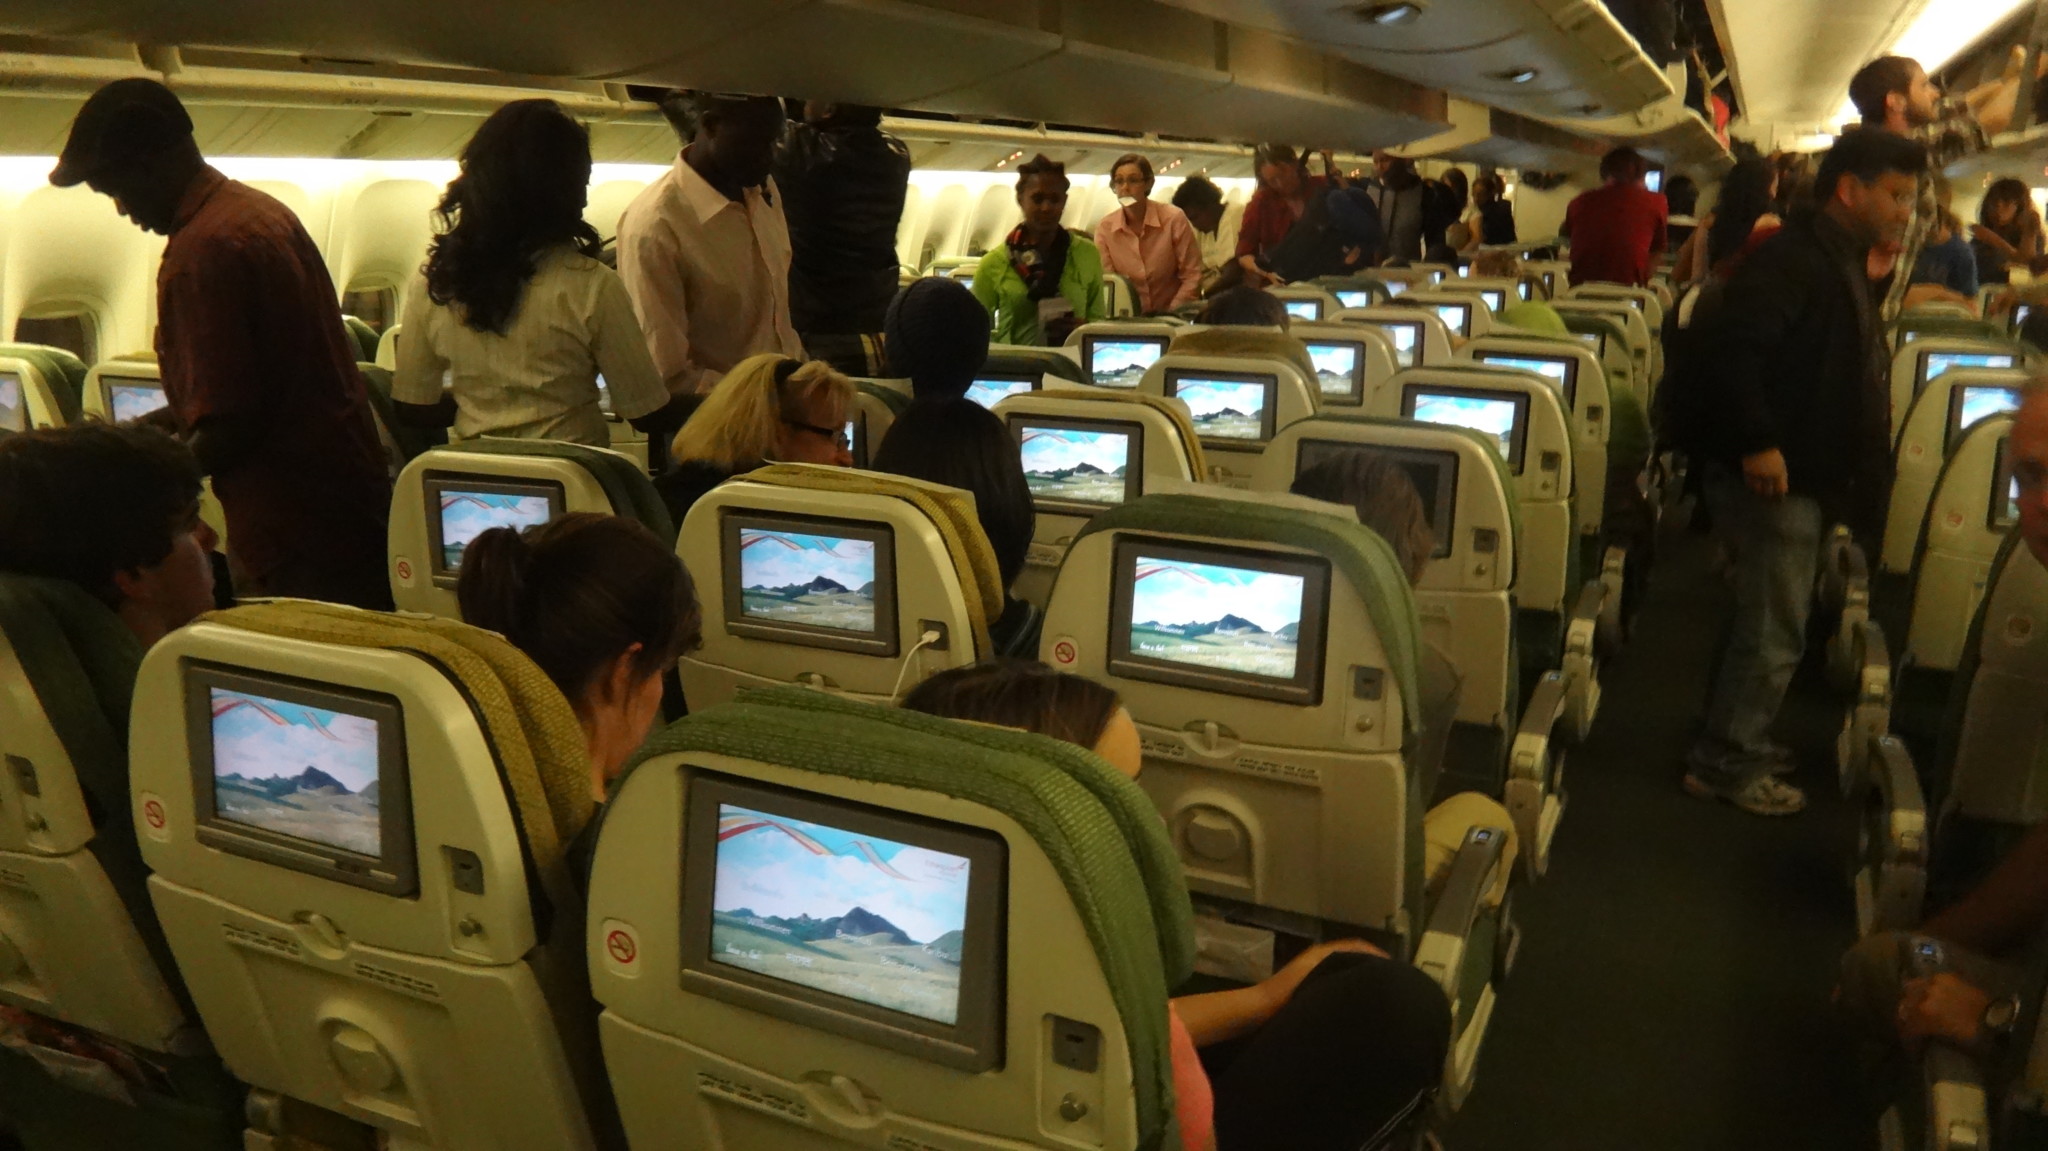 a group of people sitting in an airplane with monitors on the seats